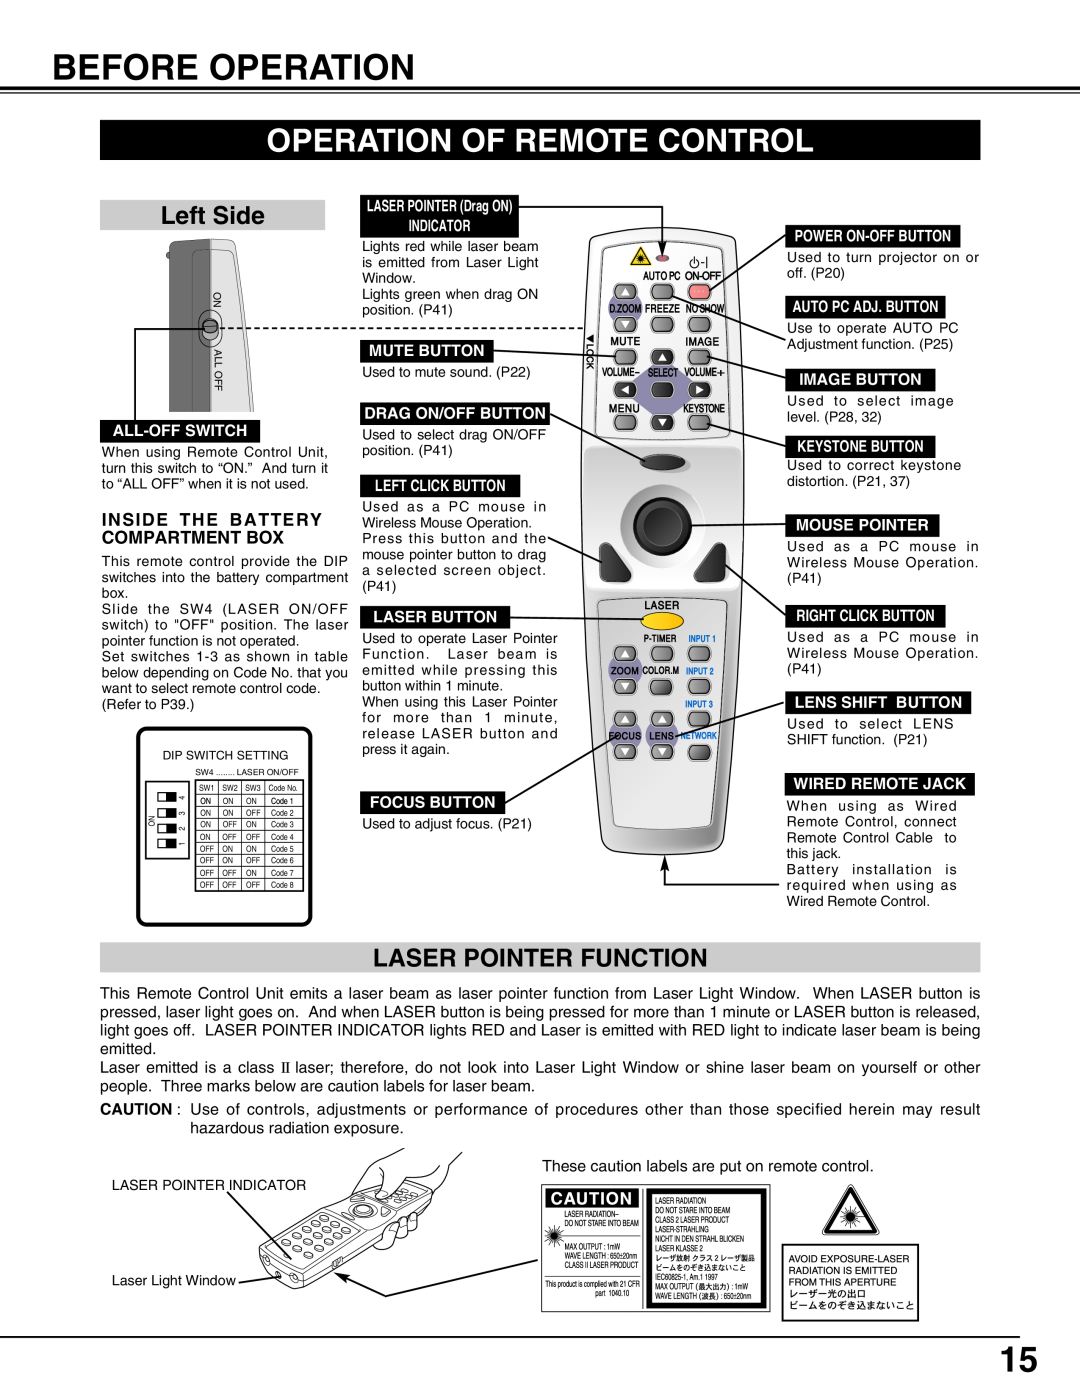 Eiki LC-X70 instruction manual Before Operation, Operation Of Remote Control, Left Side, Laser Pointer Function 